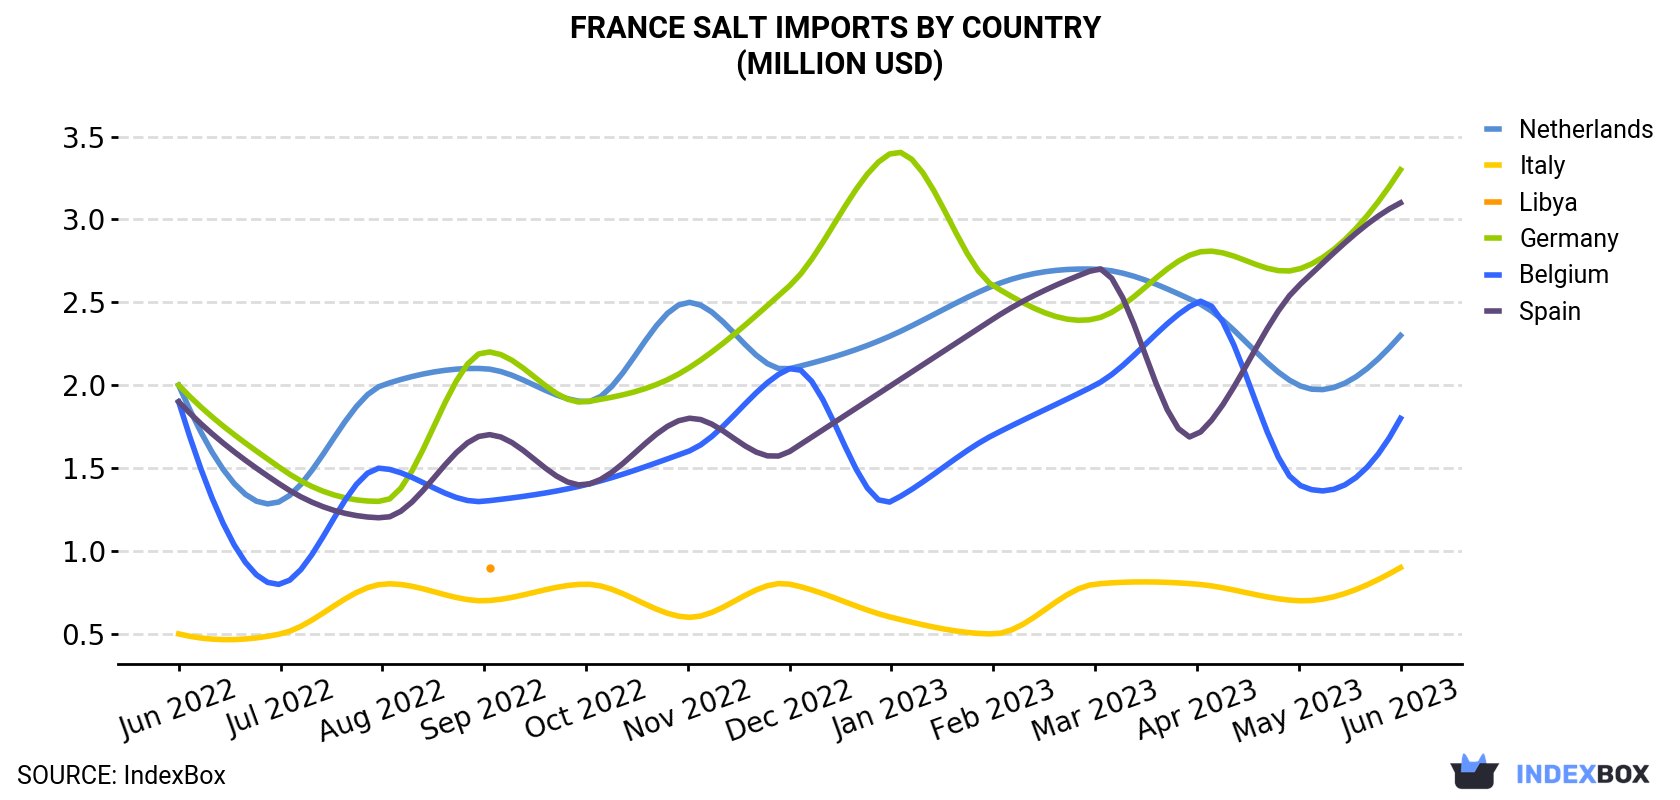 France Salt Imports By Country (Million USD)